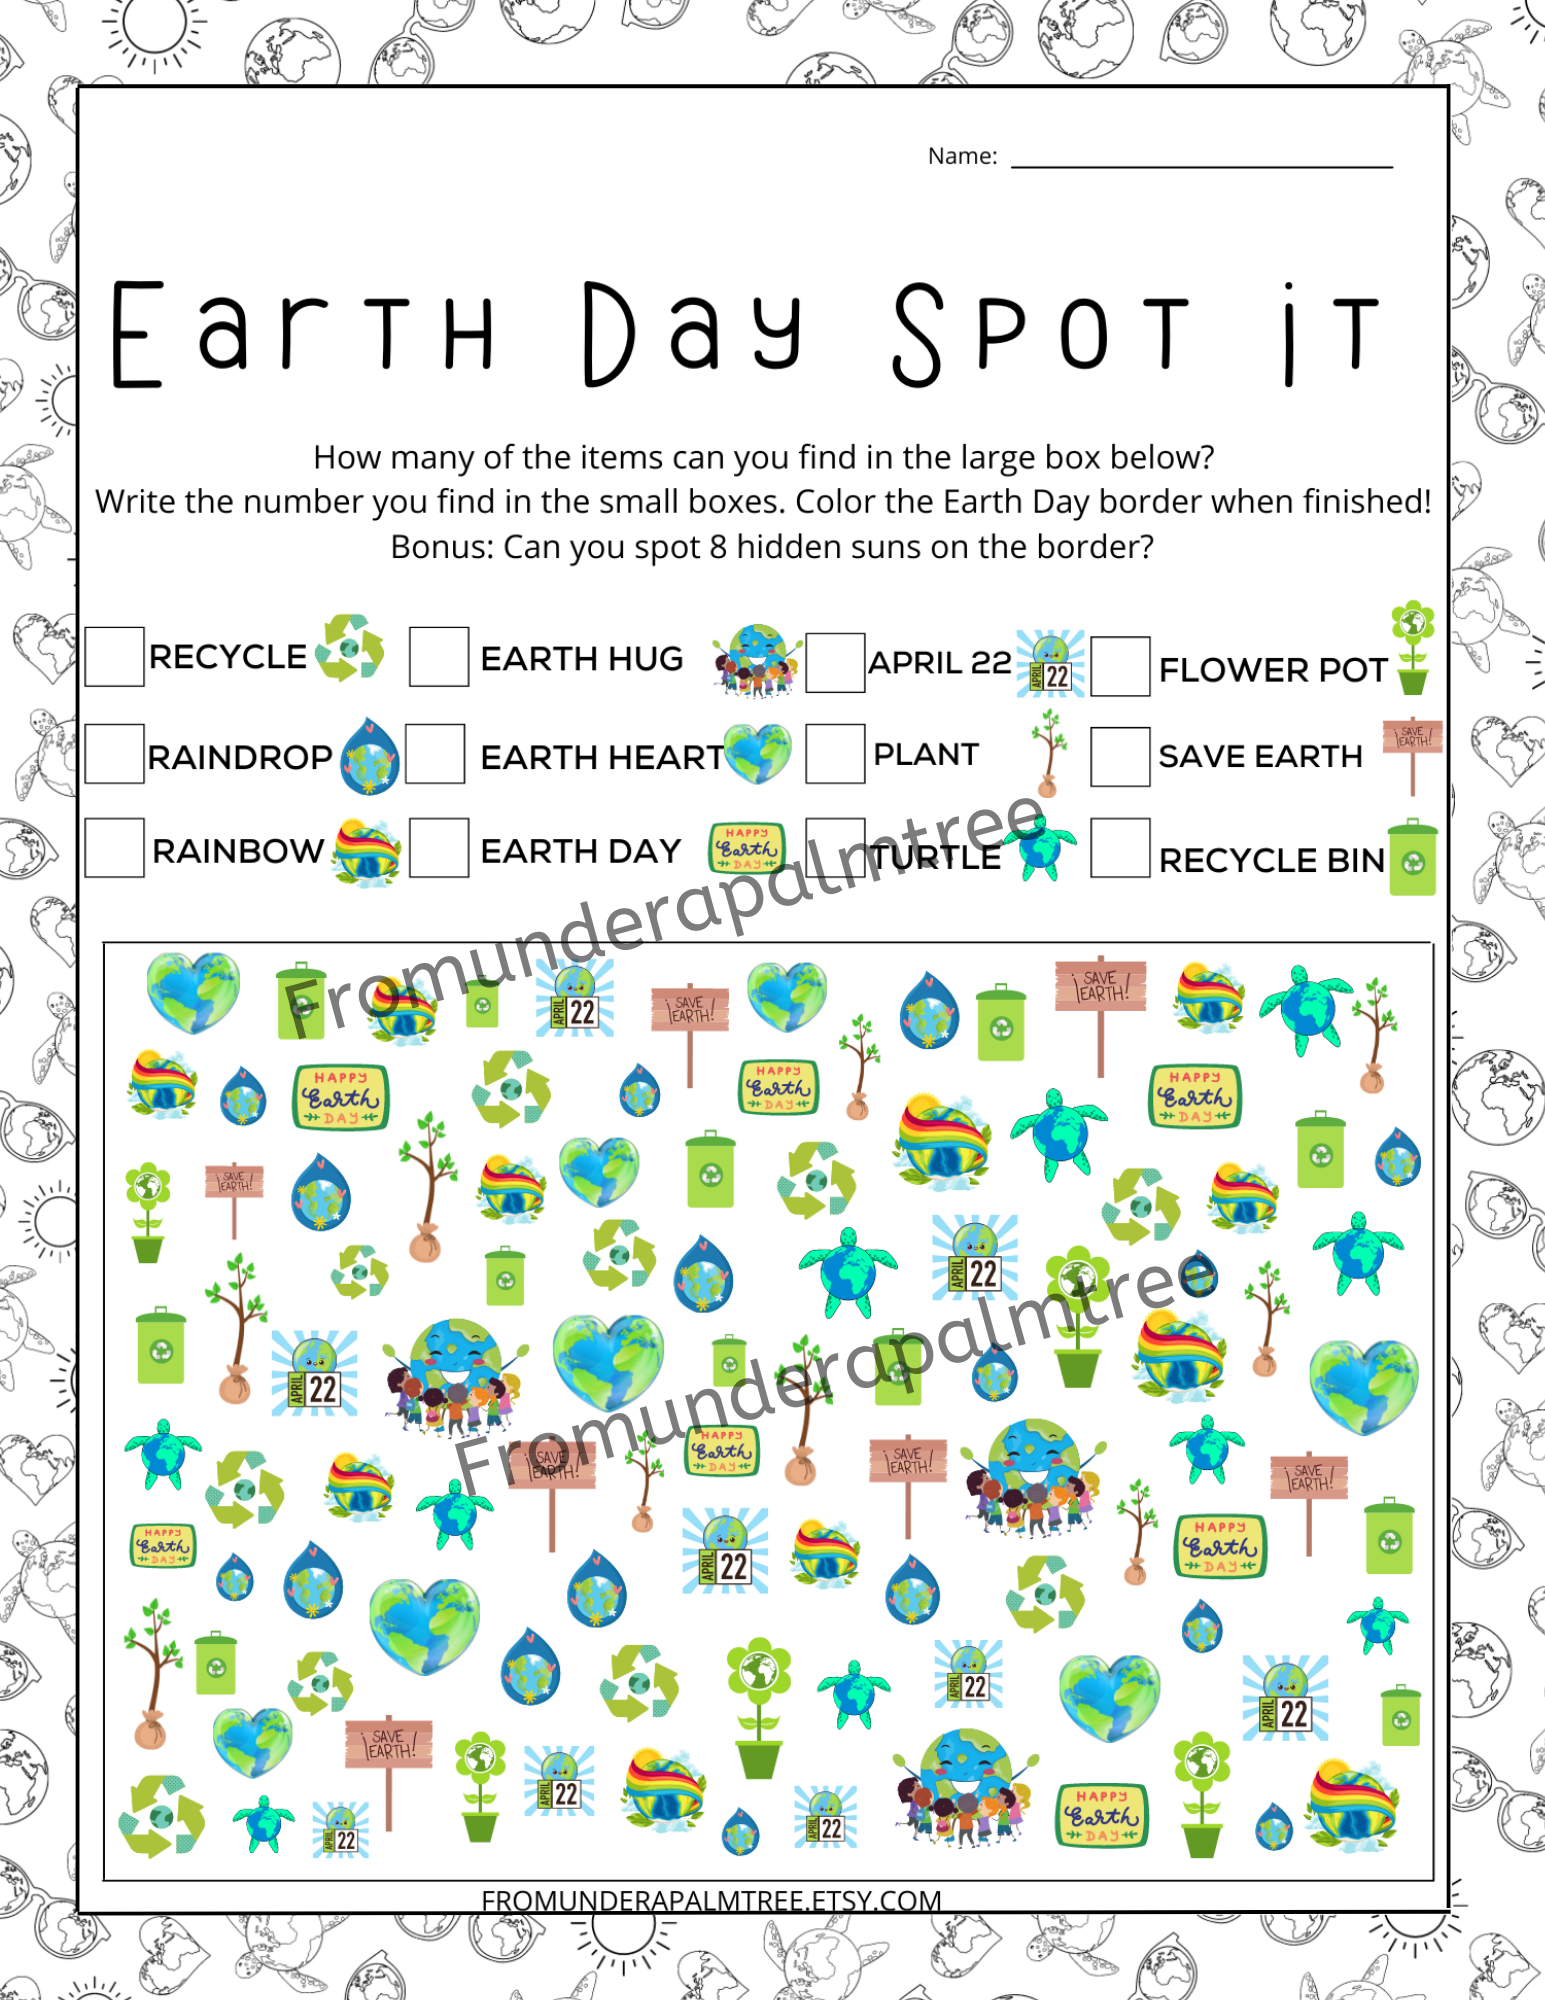 earth day | earth day worksheet | earth day printables | earth day kids activities | earth day actviity | earth day activities | kids printables | kids worksheets | earht day word search | earth day games | earth day scavenger hunt | scavenger hunt for kids | earth day spot it | earth day prompted writing worksheet | earth day coloring sheet | earth day coloring | earth day color by code | earth day color by numbers | 